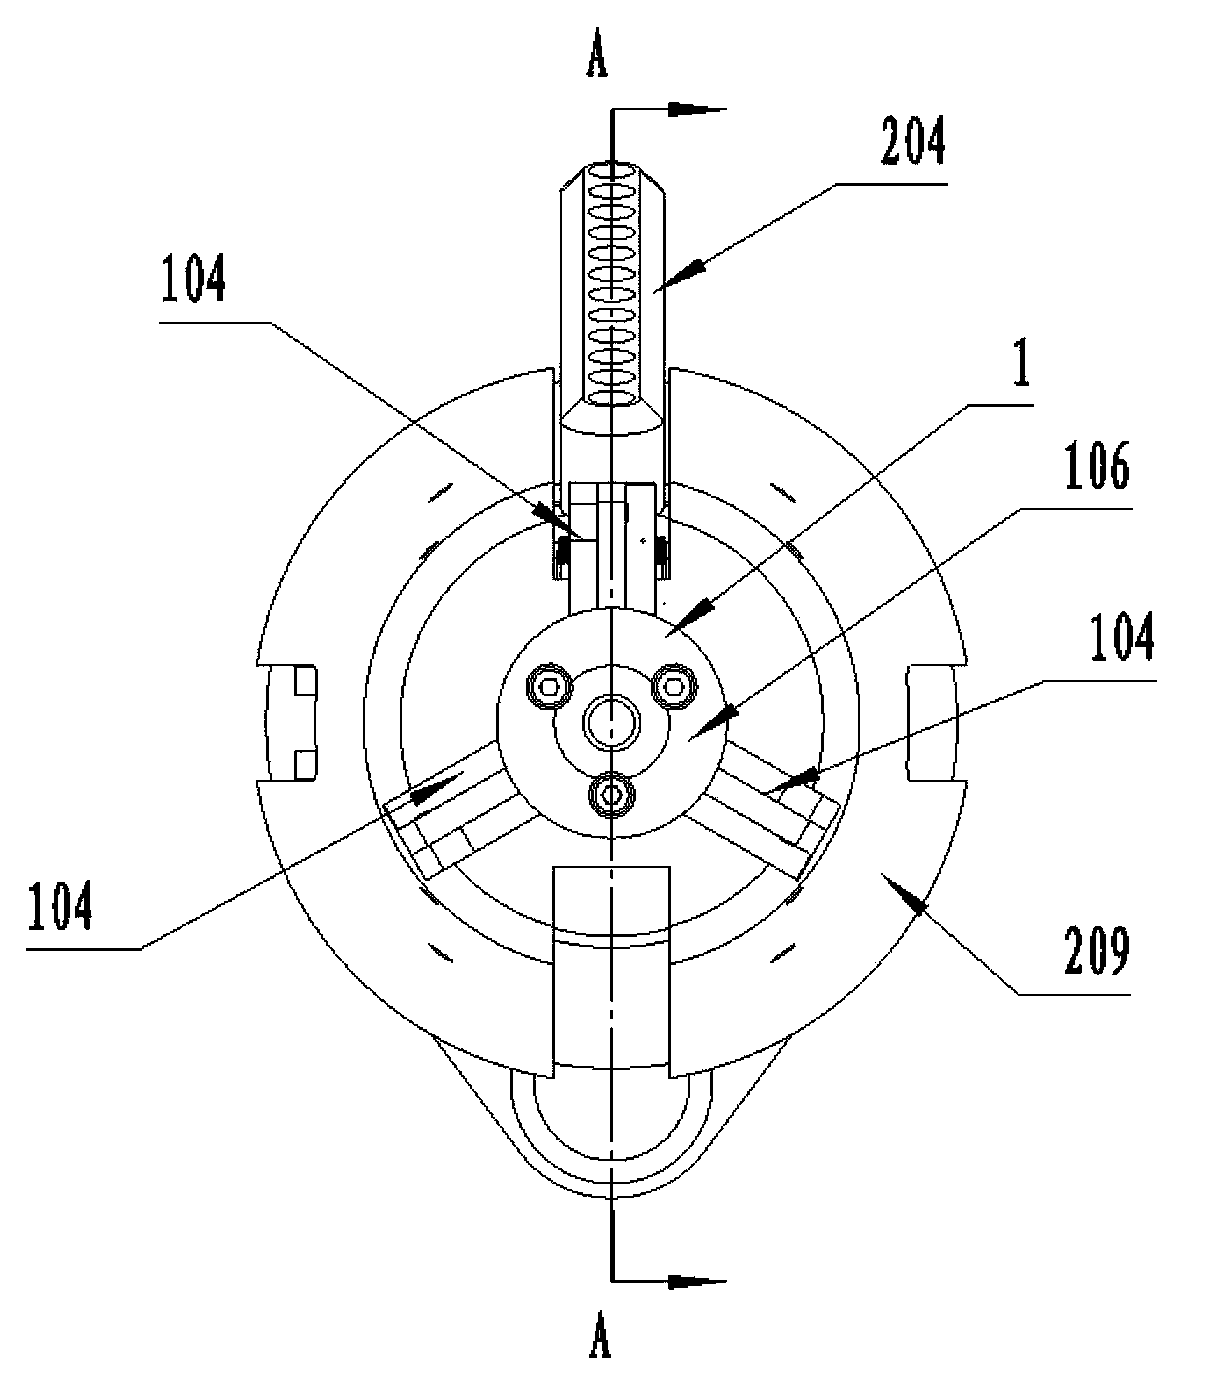 Drilling tool internal thread rotary detection device based on magnetic memory effect